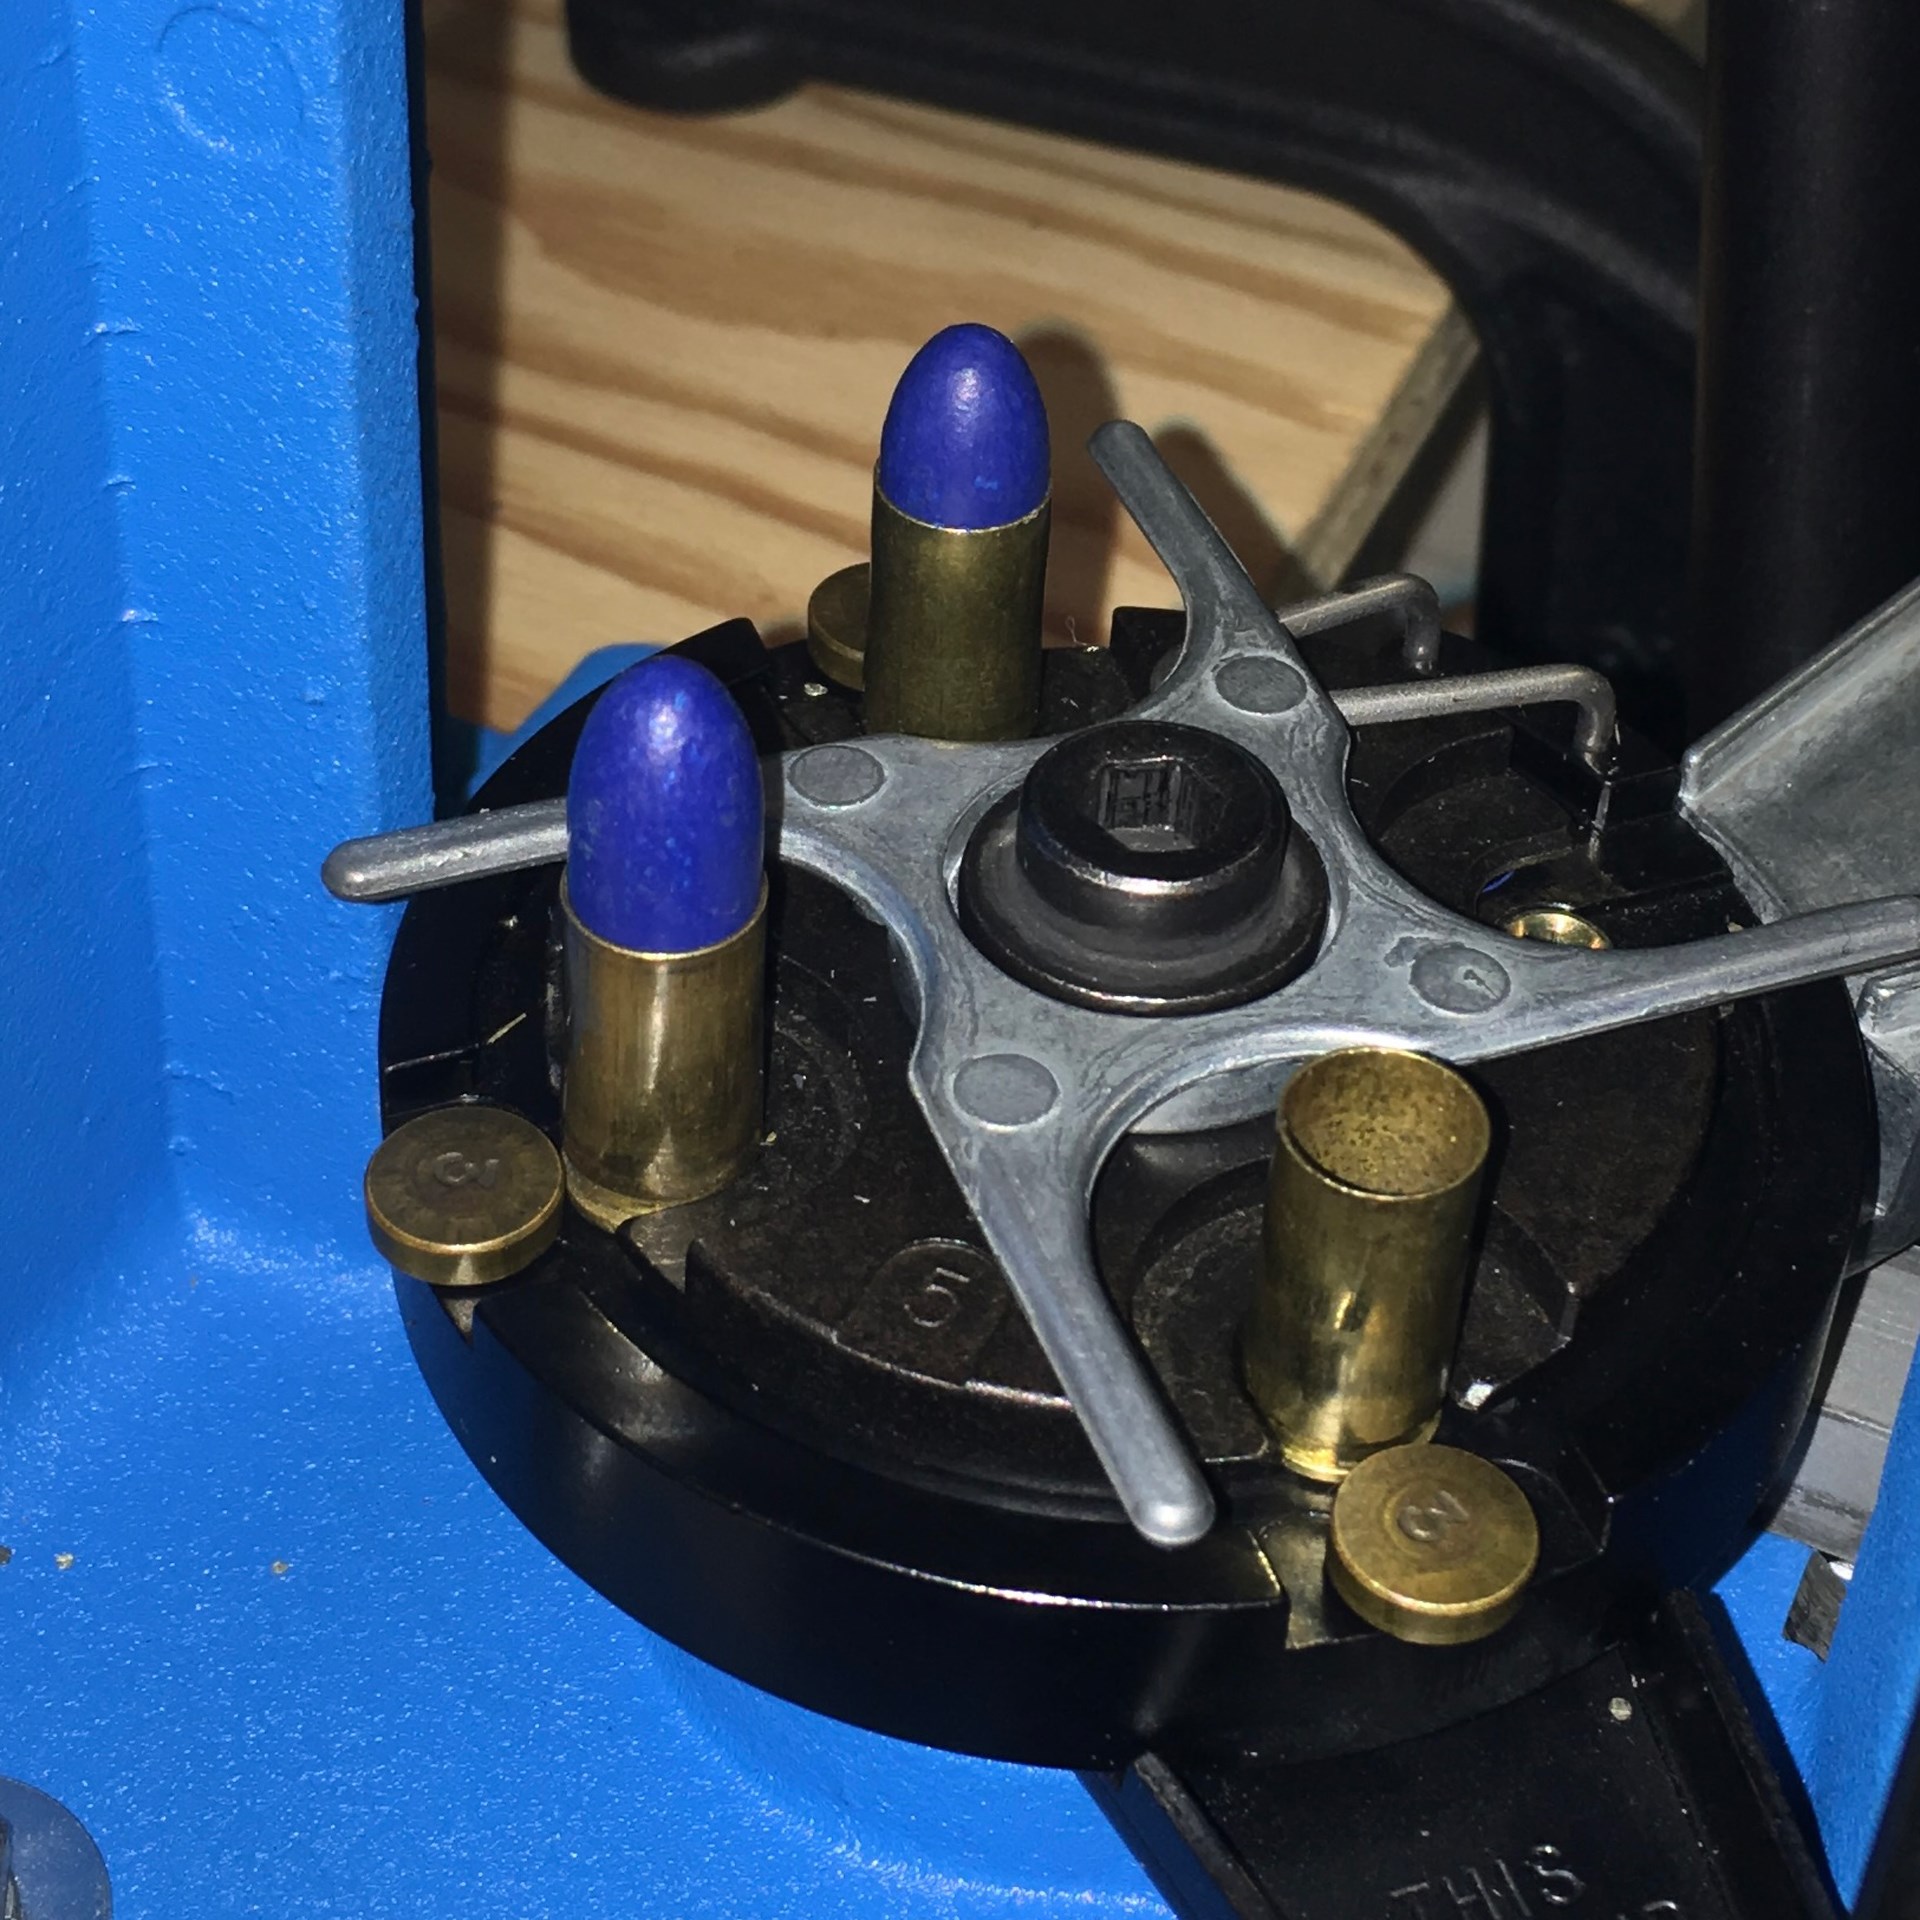 Dillon reloading press plate with ammunition bullets brass cases blue coated bullets